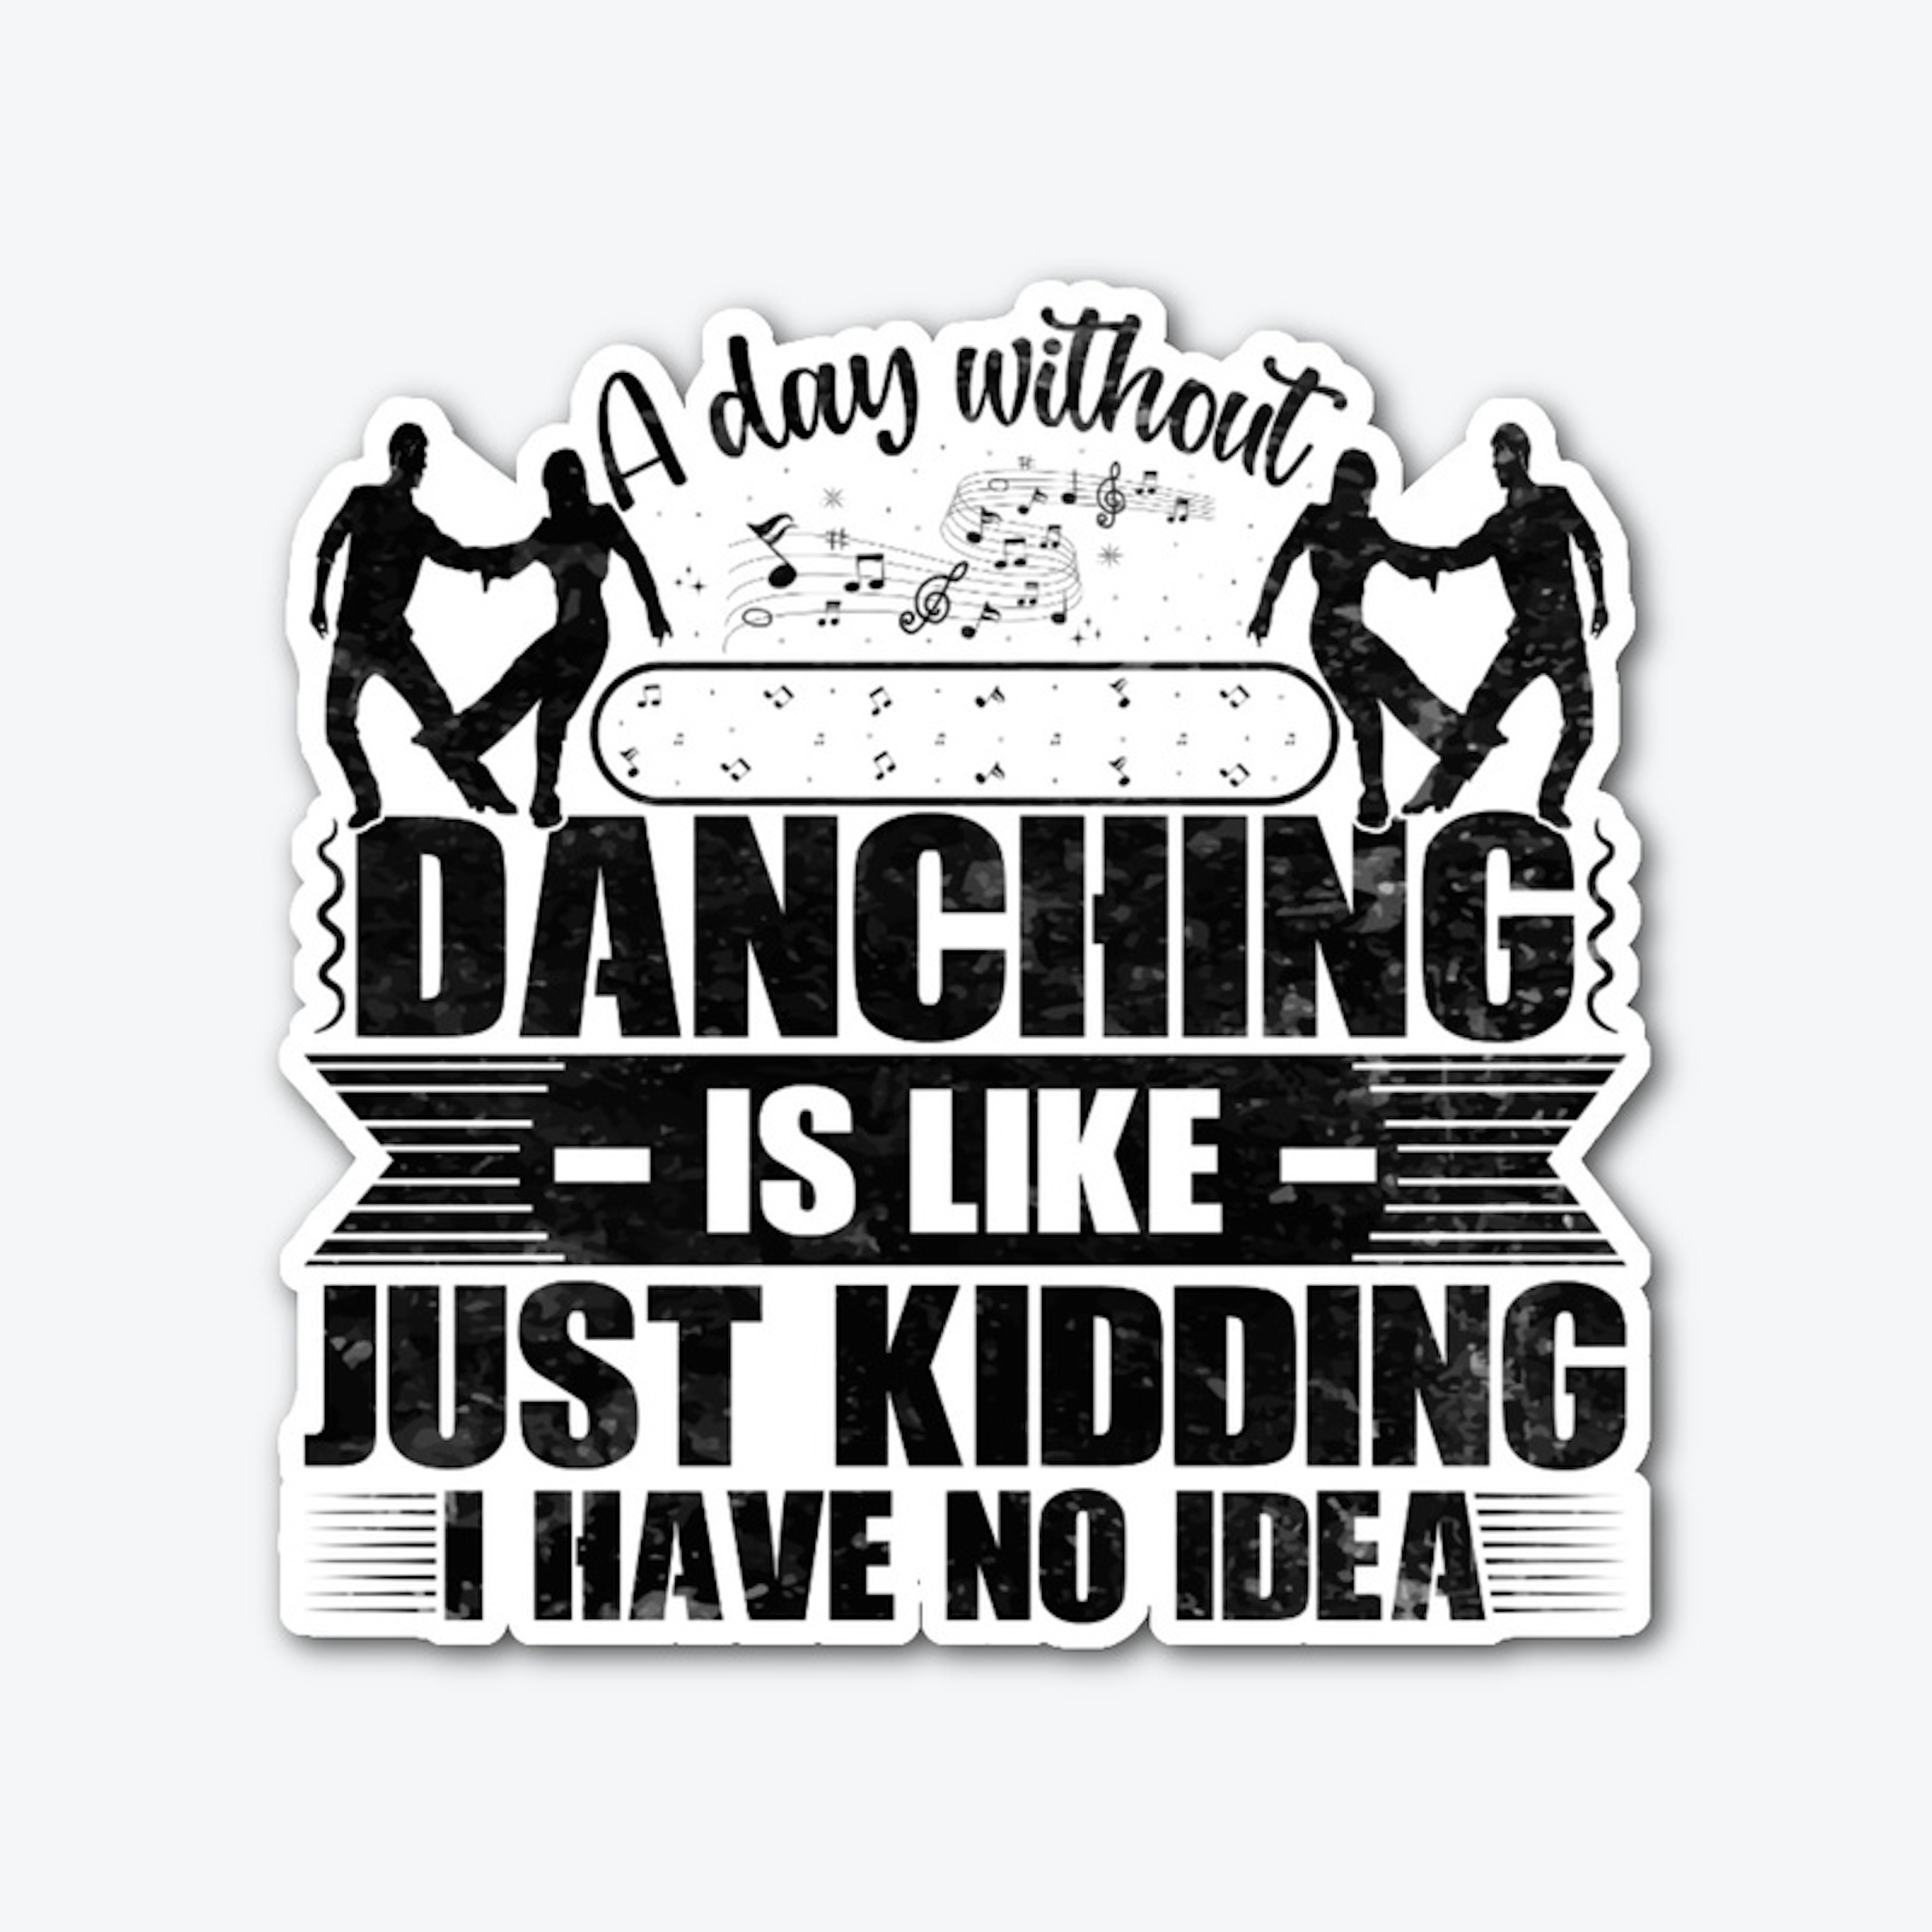 A day without dancing